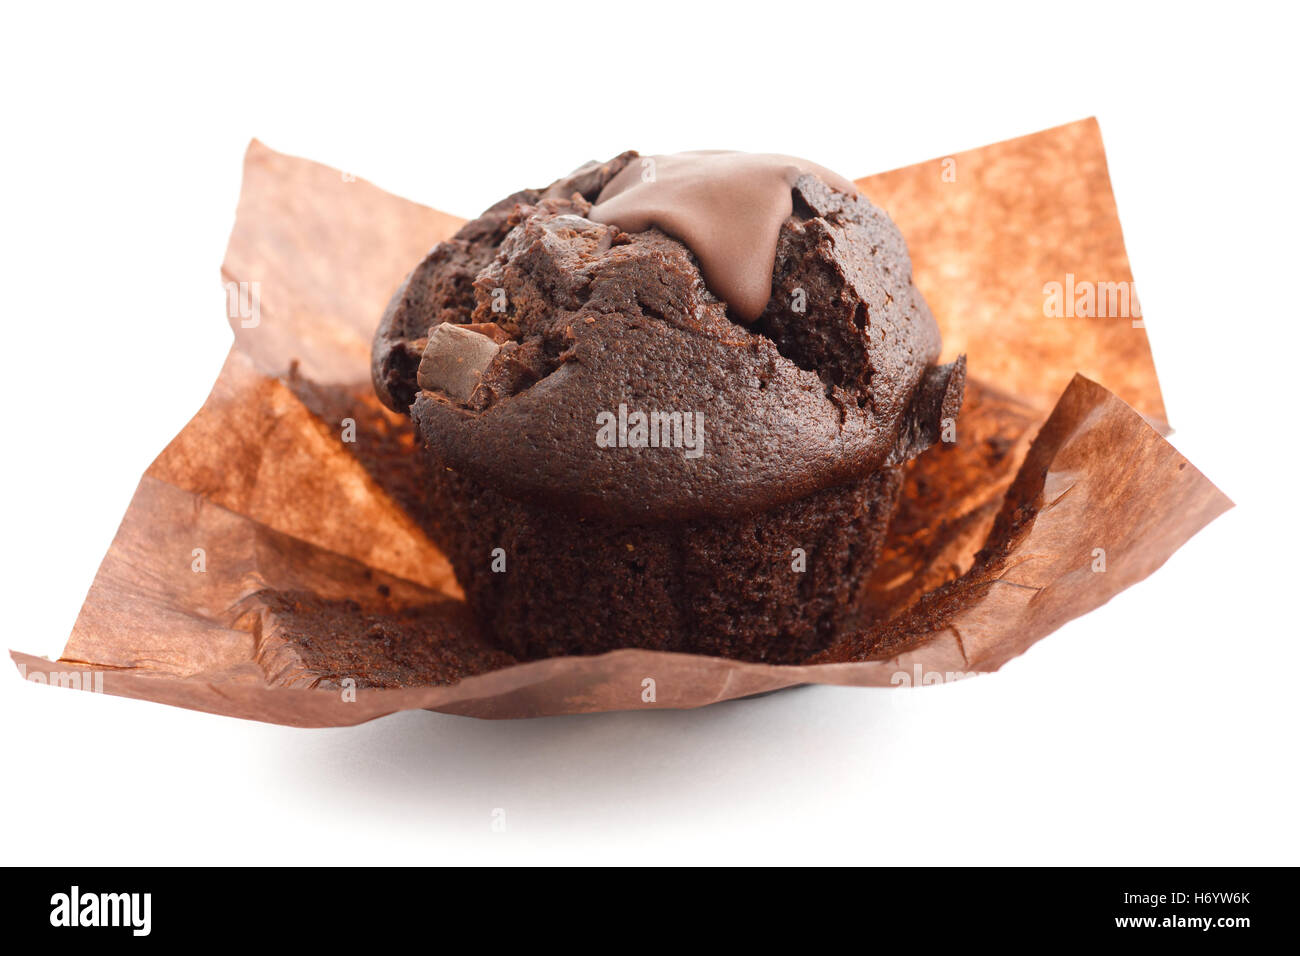 Chocolate chip muffin in brown wax paper. Unwrapped. Stock Photo